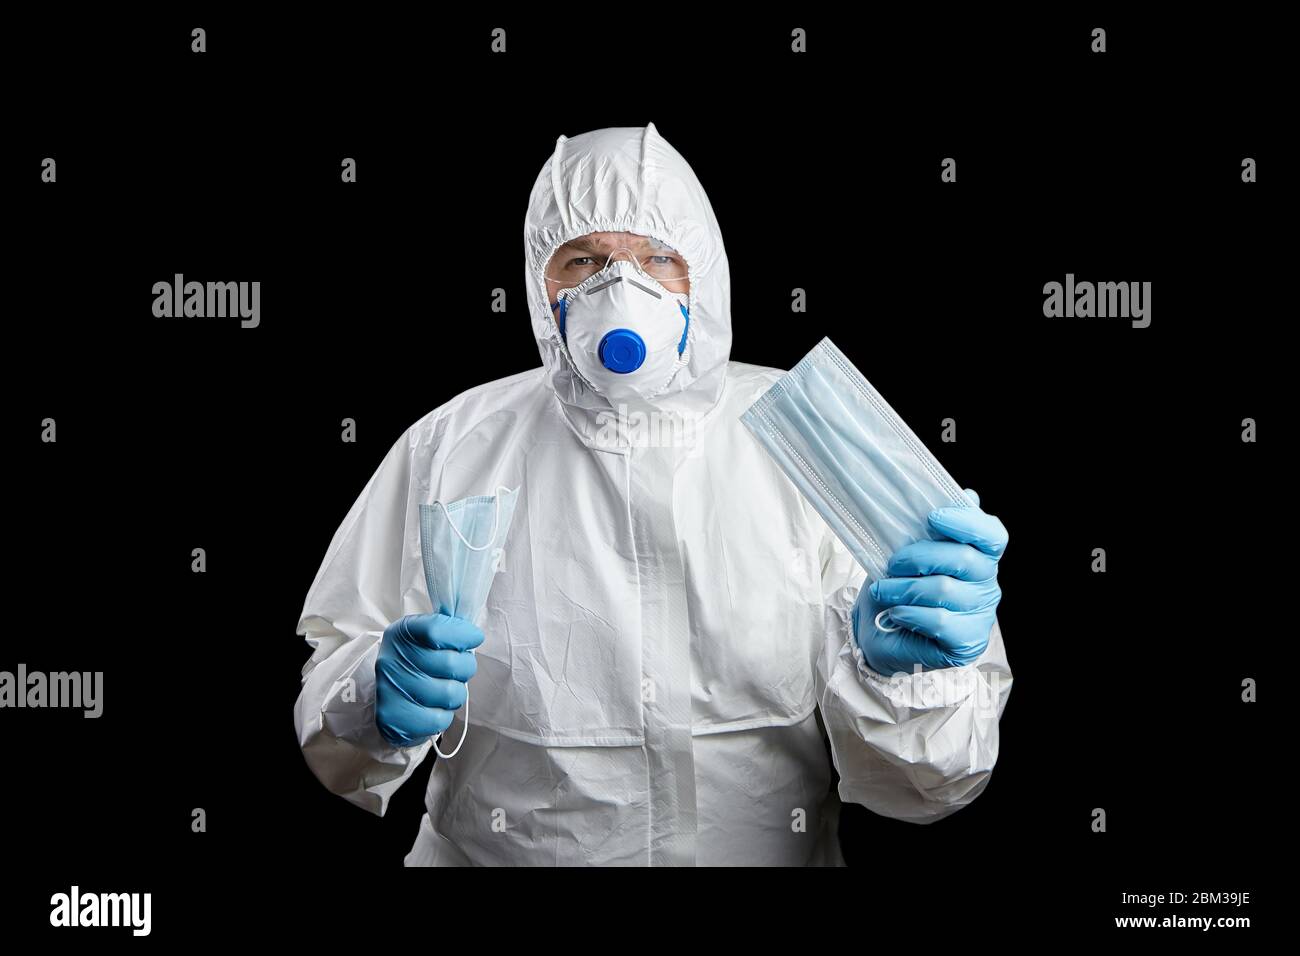 Doctor in white protective suit and facepiece respirator with medical face masks in hands, disposable blue gloves and googles, isolated on black backg Stock Photo